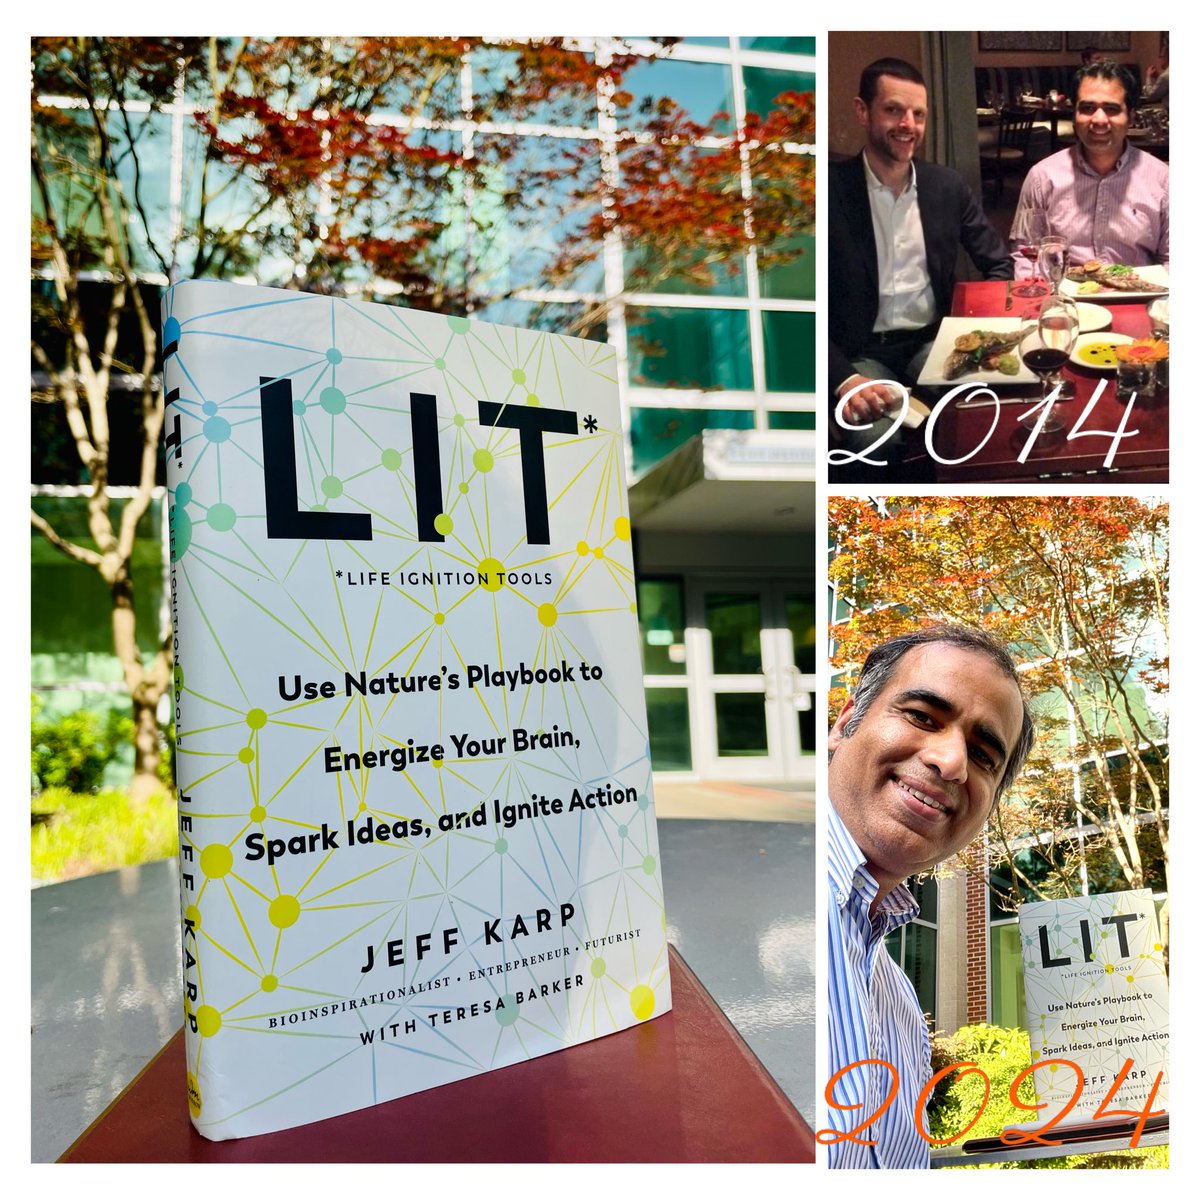 “A conscious cadence vs the urgency of now!” Not only his research but also @MrJeffKarp’s wisdom, which he shared w/ me, has inspired me since ’14. I bought Jeff’s book “LIT” to share w/ my lab his insights on unlocking innermost talents, creativity, & self-discovery! Gr8 read!!!